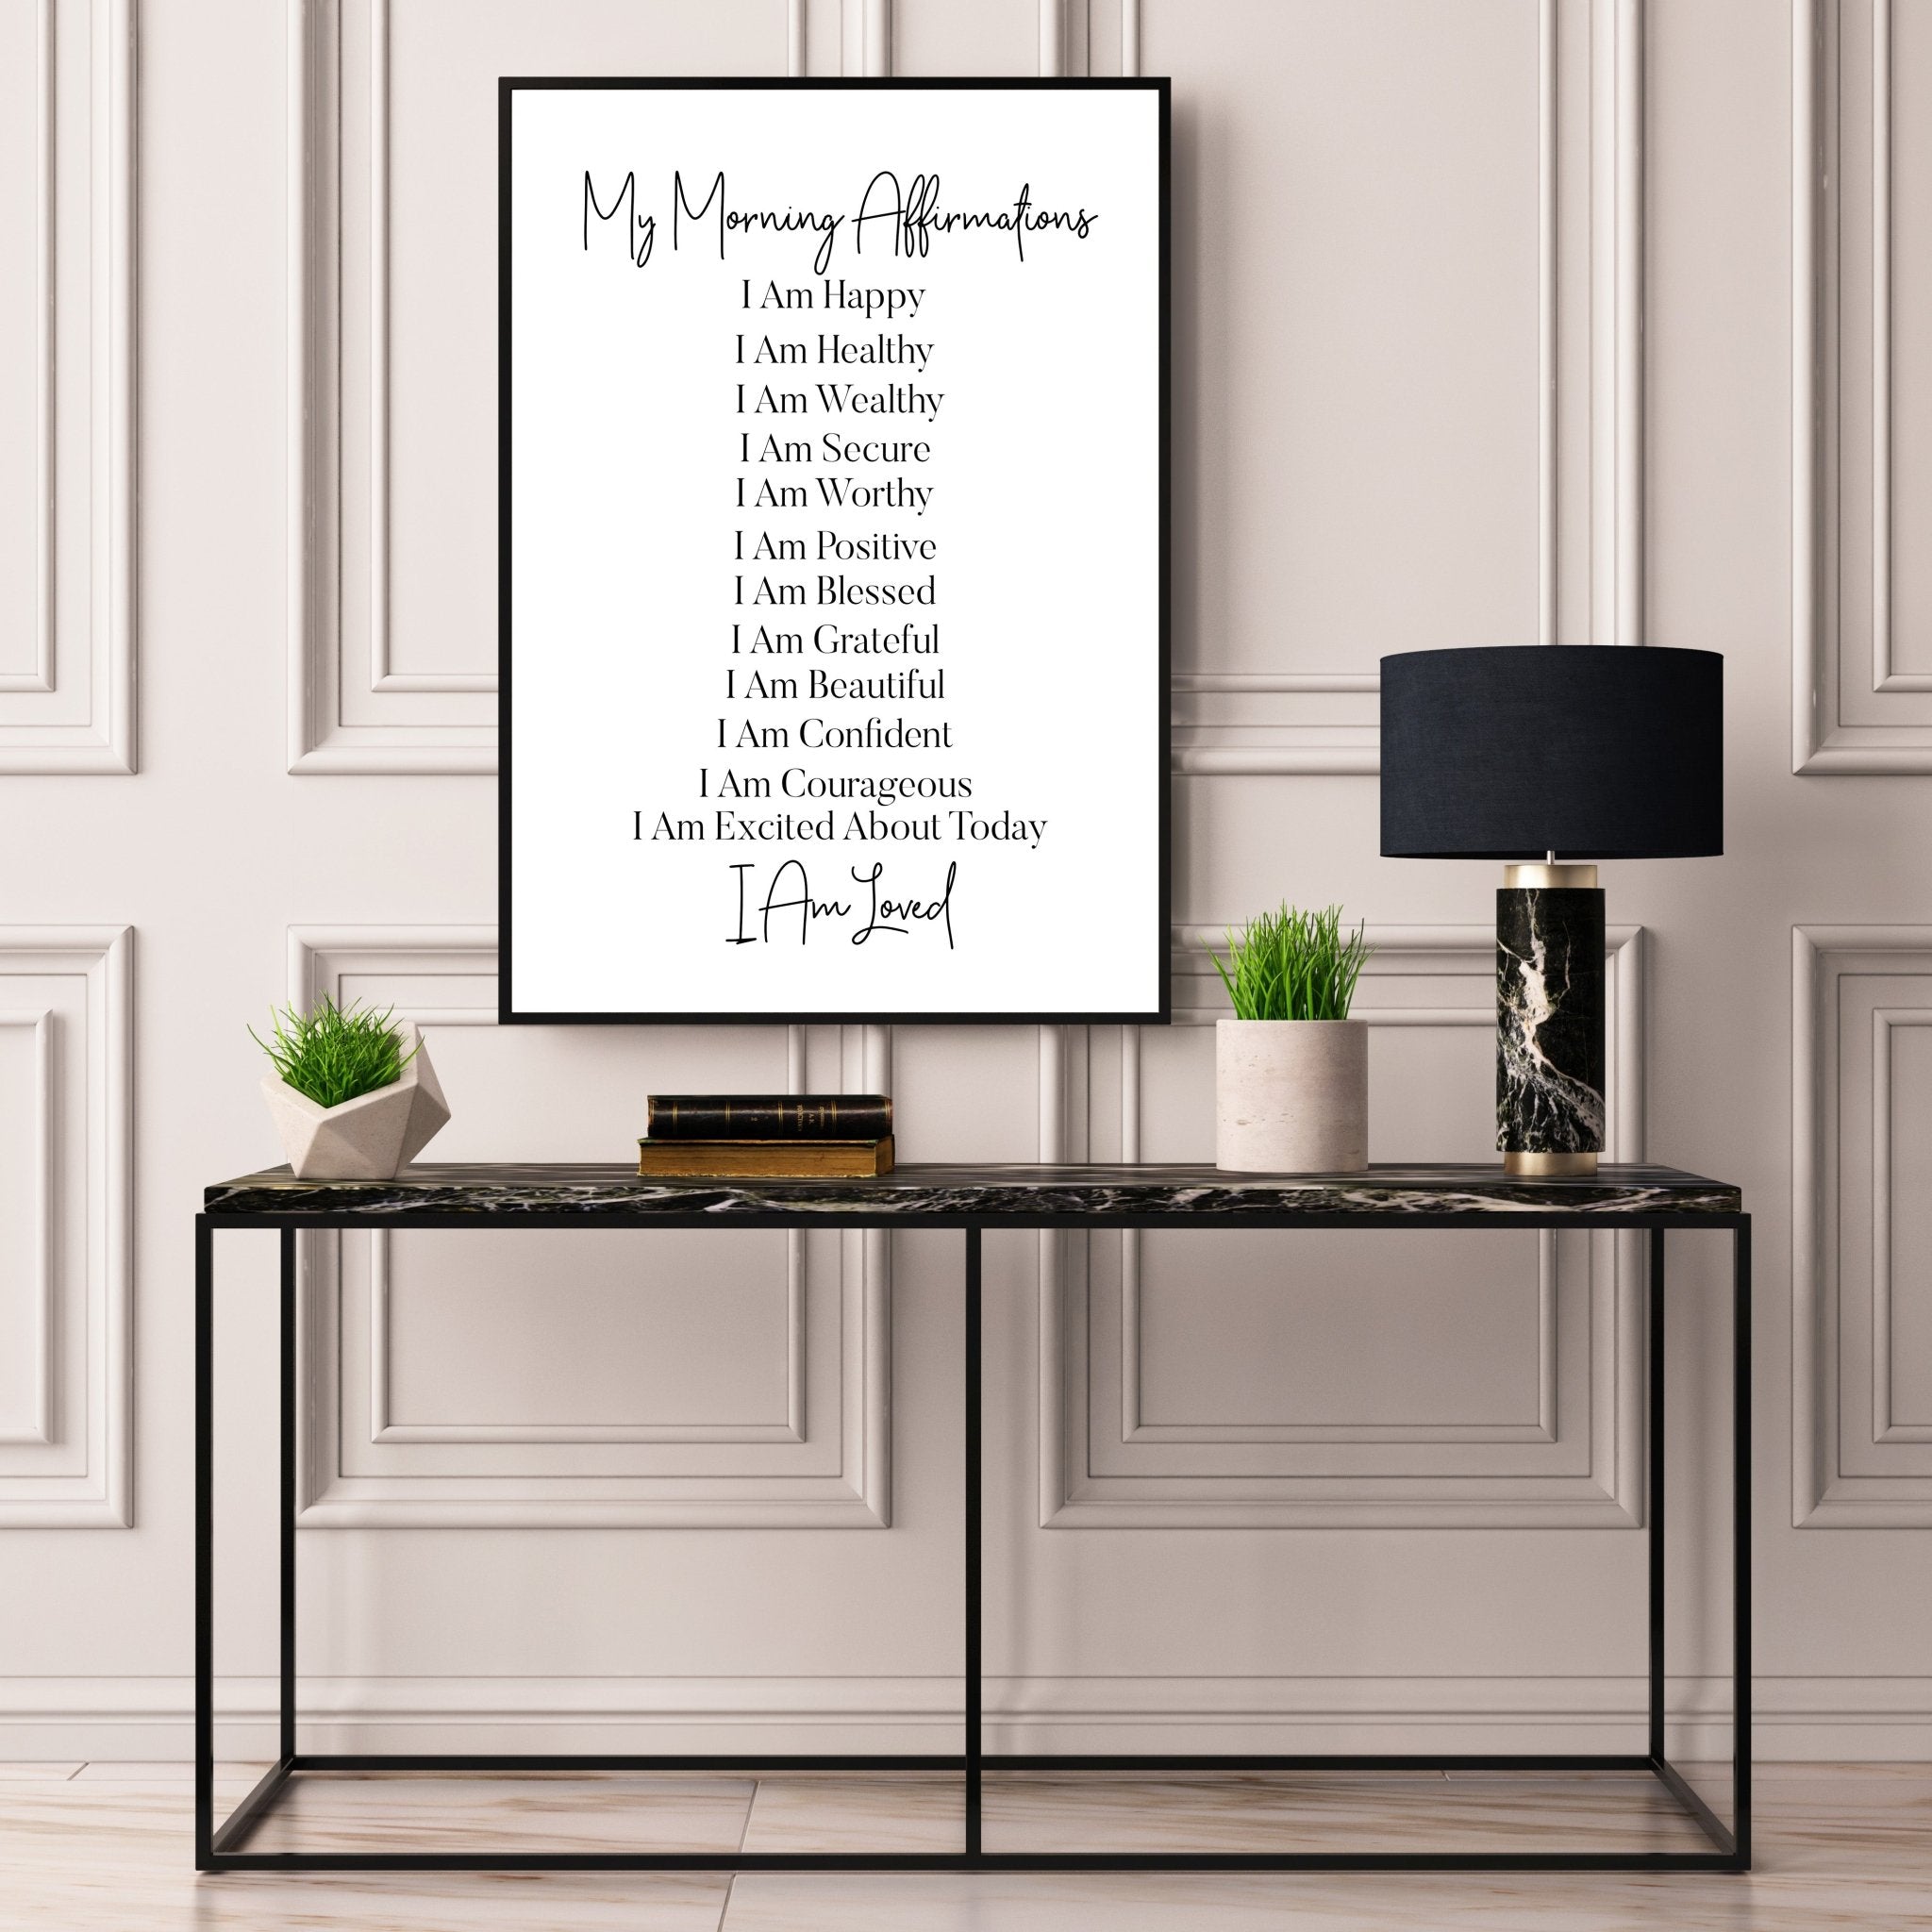 Morning Affirmations - D'Luxe Prints